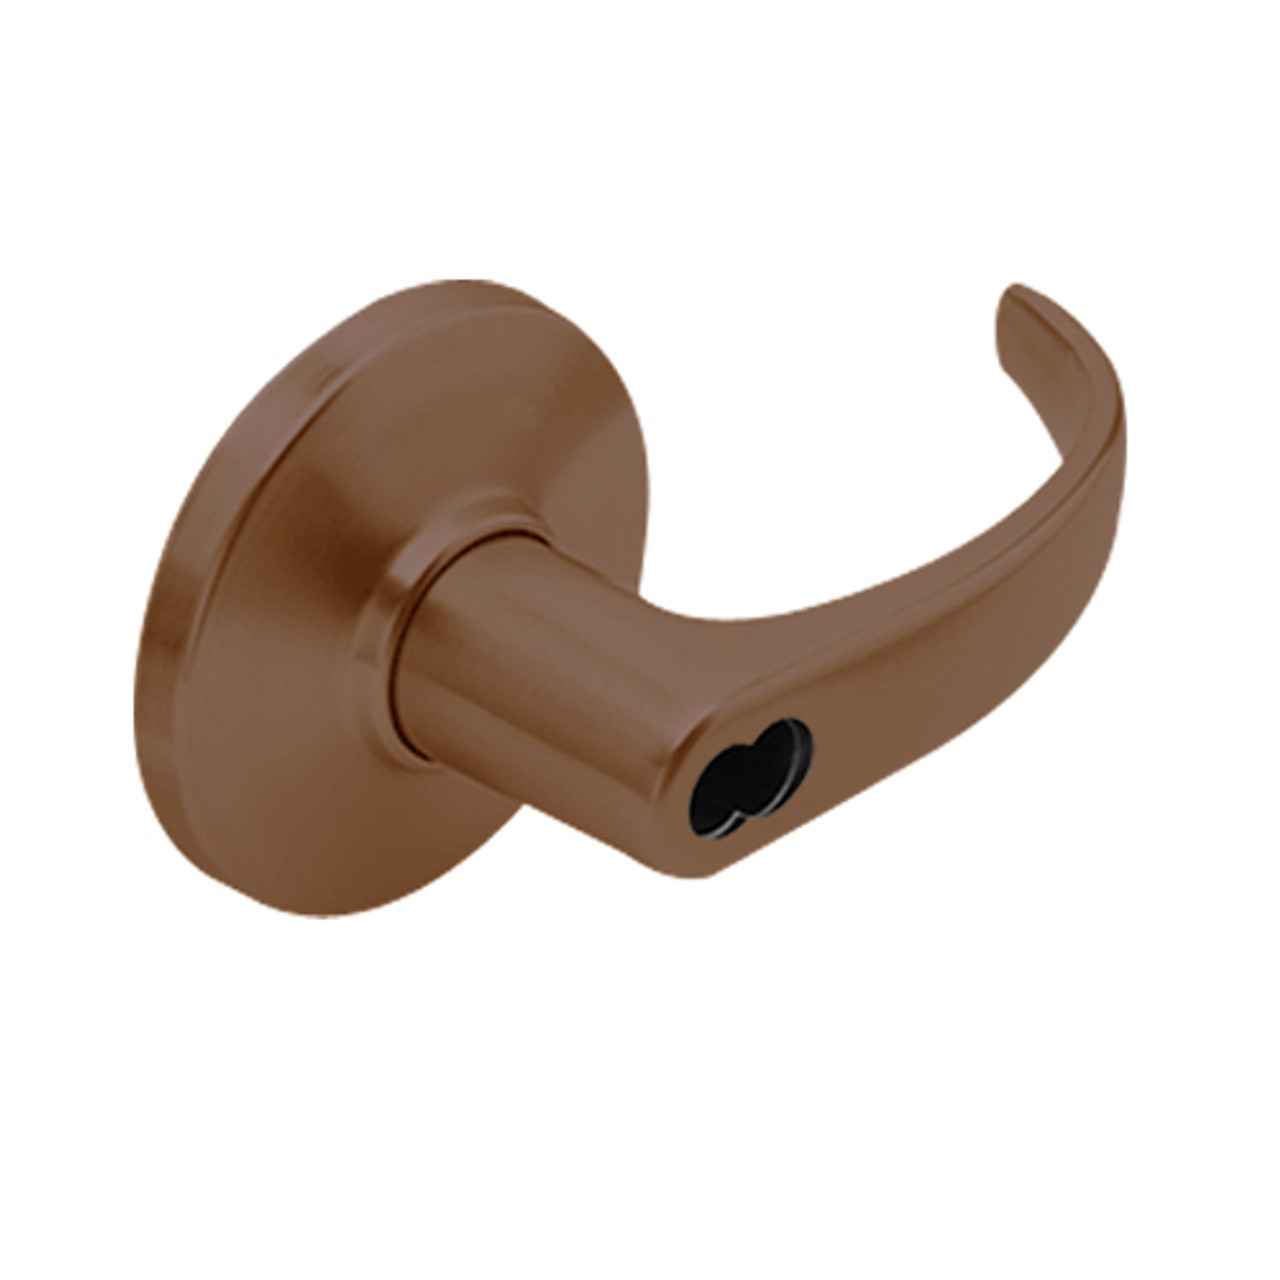 9K37A14DS3690 Best 9K Series Dormitory or Storeroom Cylindrical Lever Locks with Curved with Return Lever Design Accept 7 Pin Best Core in Dark Bronze